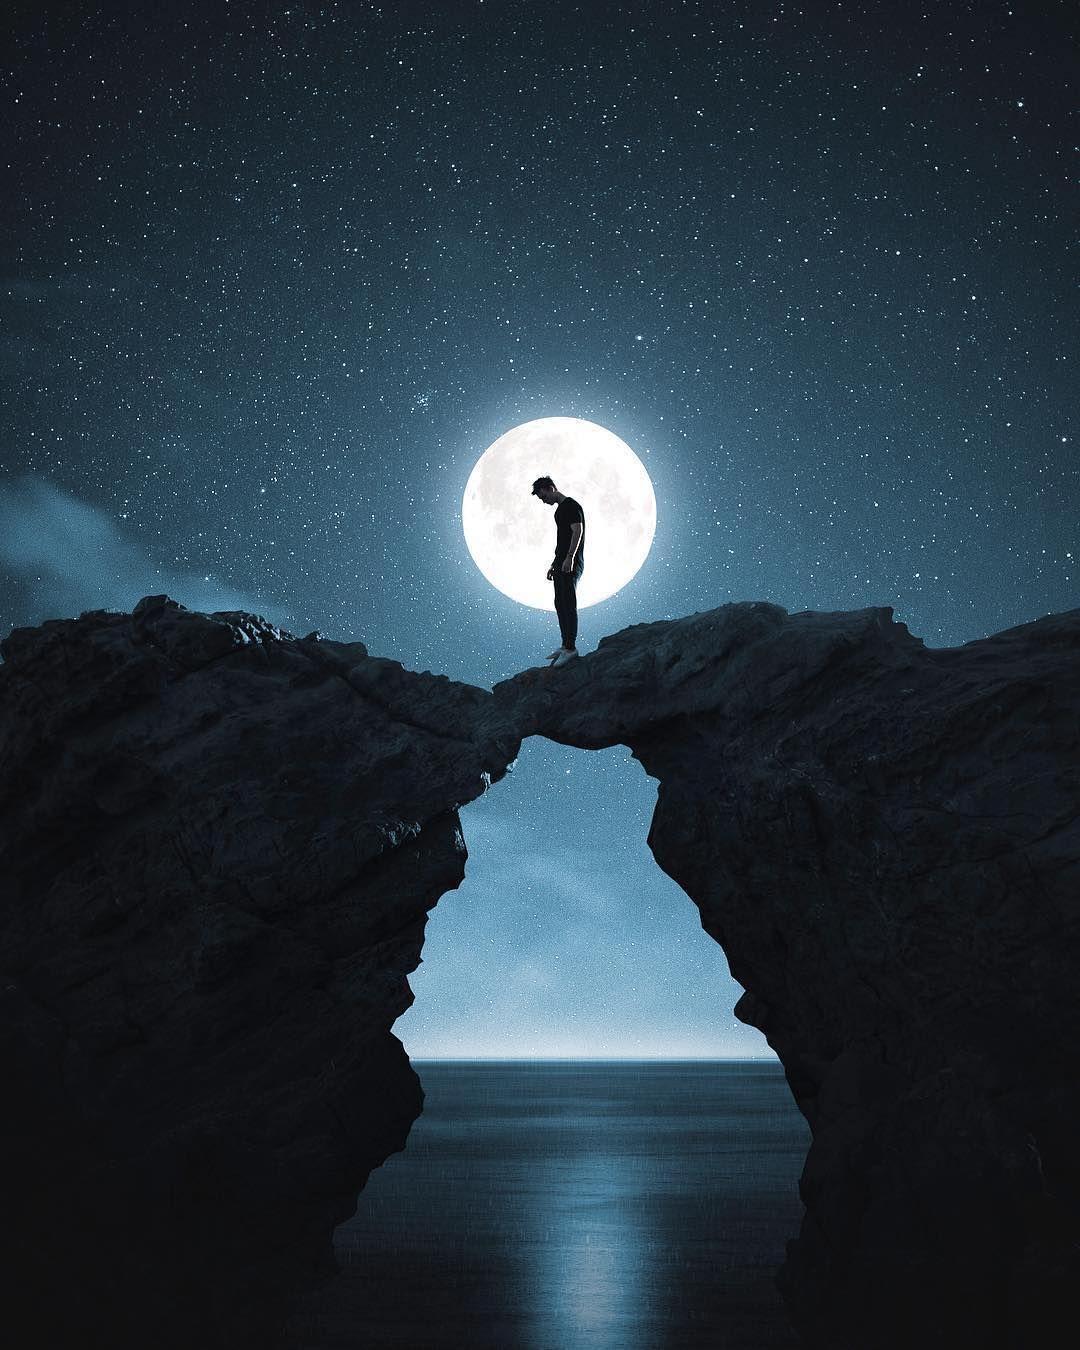 HD wallpaper silhouette of man looking at moon person standing on  mountain  Wallpaper Flare